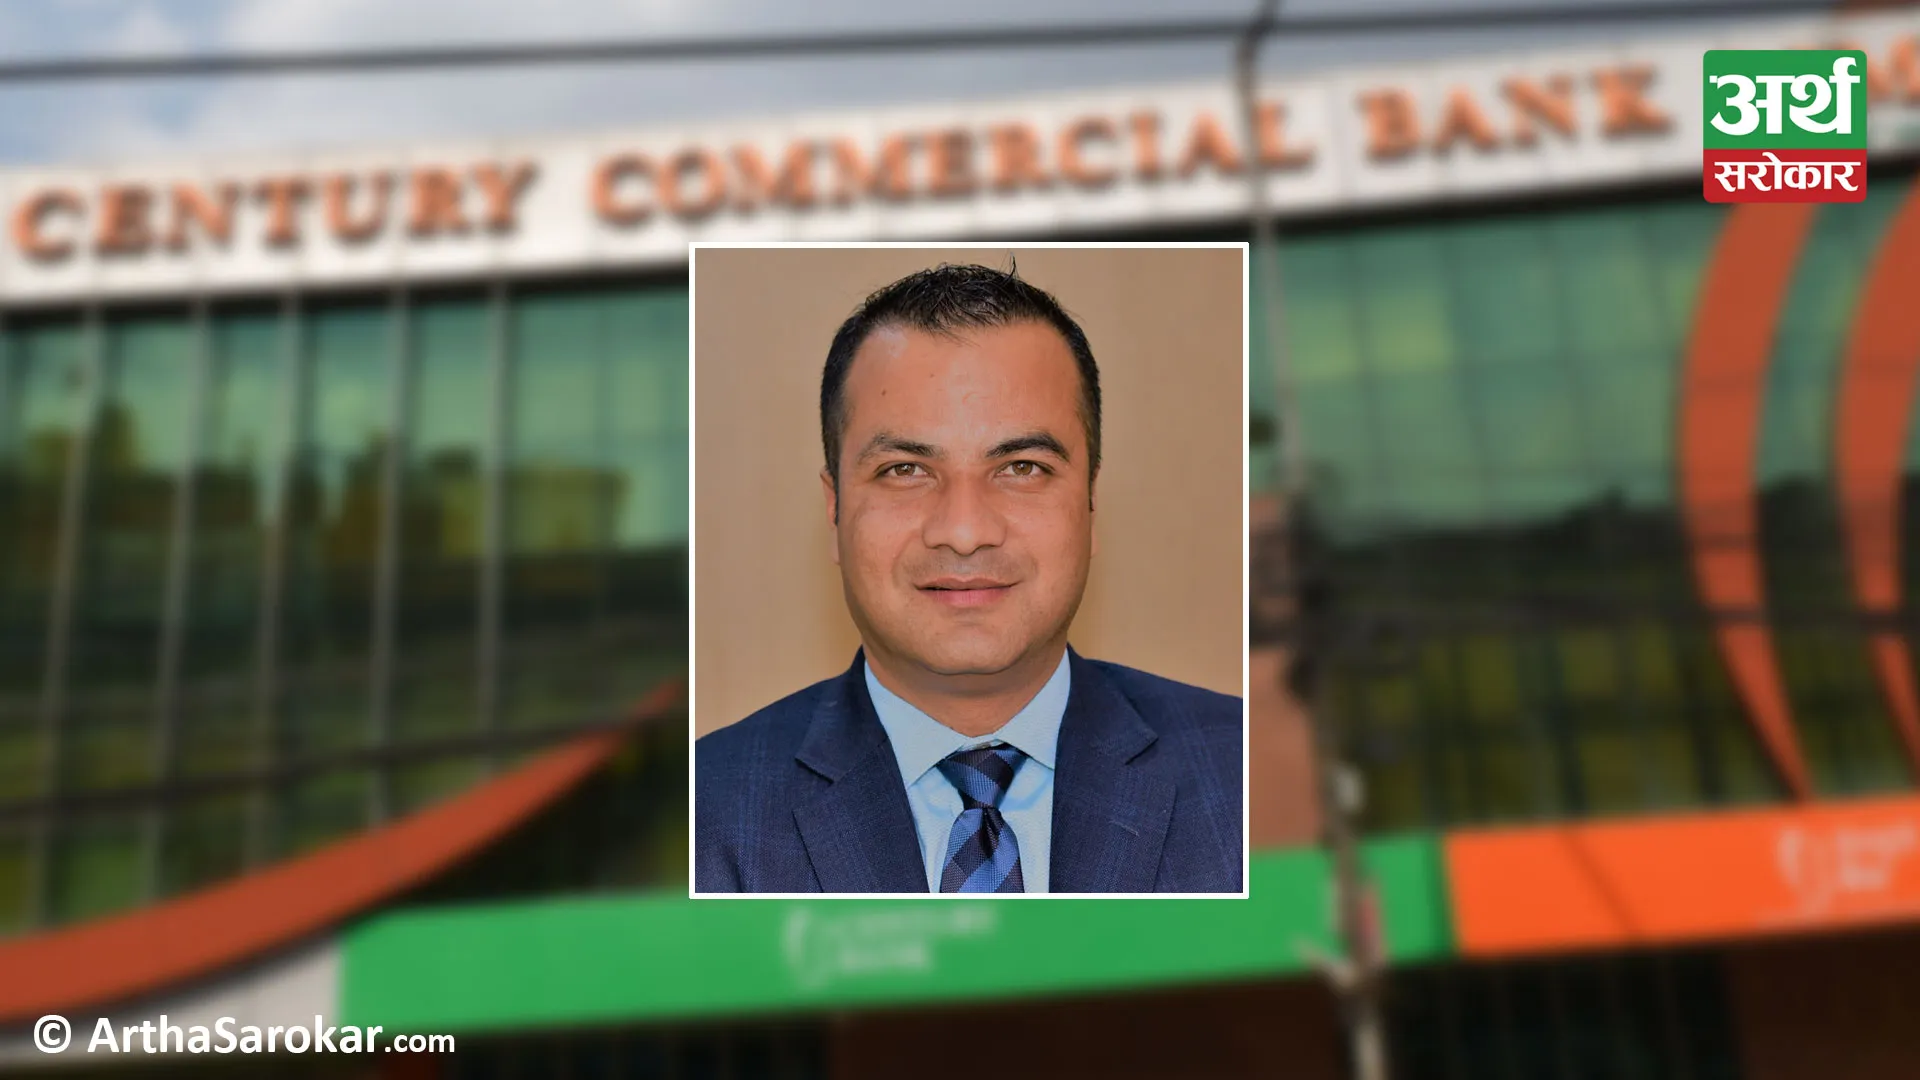 Former CEO of Century Commercial Bank Manoj Neupane arrested in a loan misuse case along with 11 others